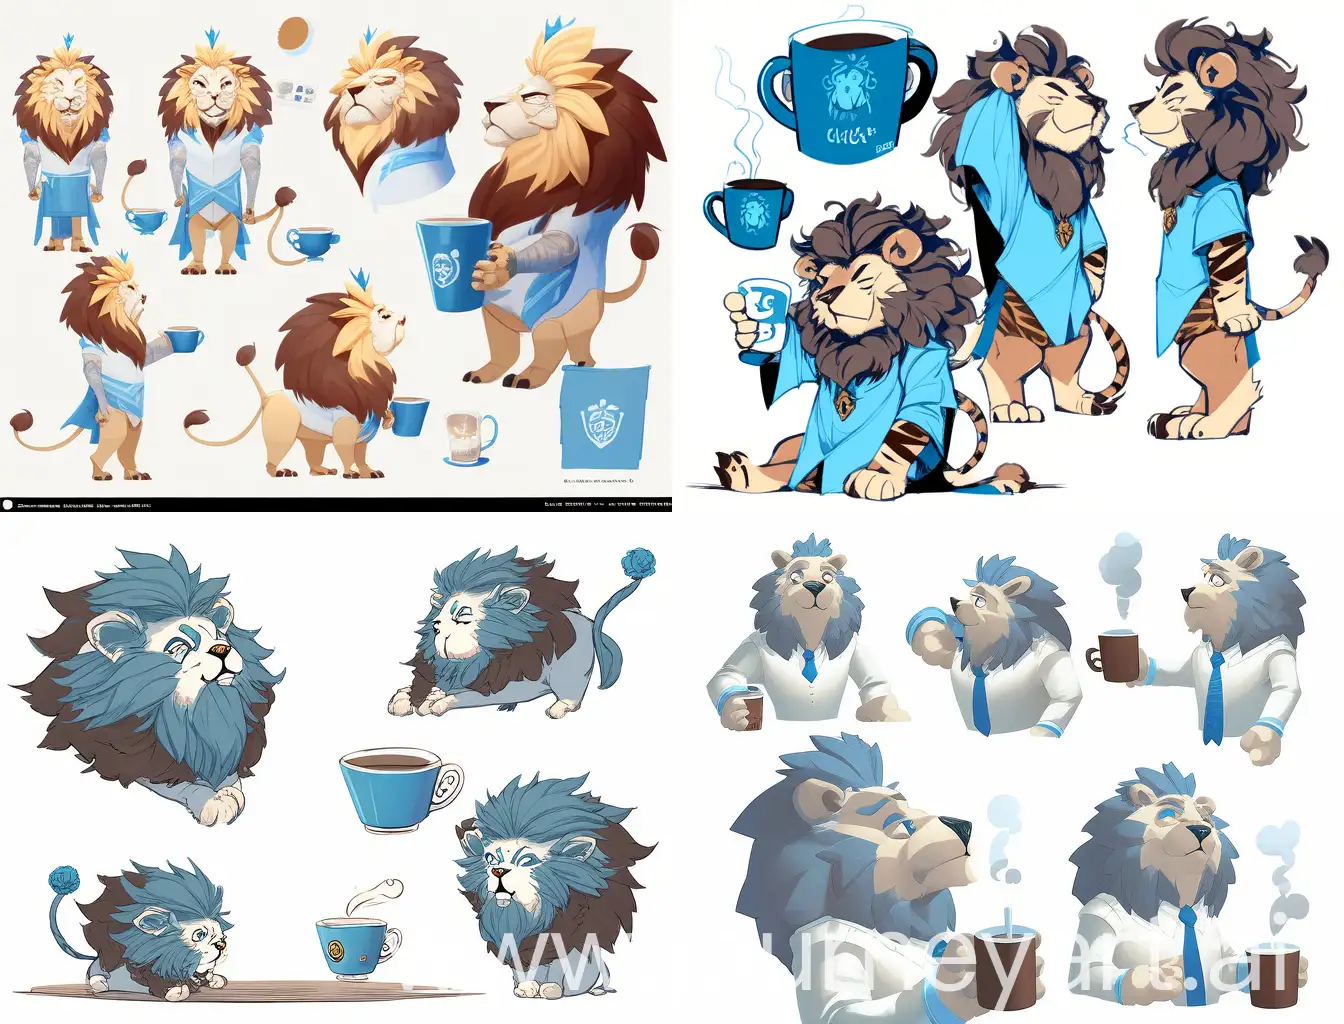 Sipping-Coffee-with-a-Cool-Blue-Lion-Cartoonish-Elegance